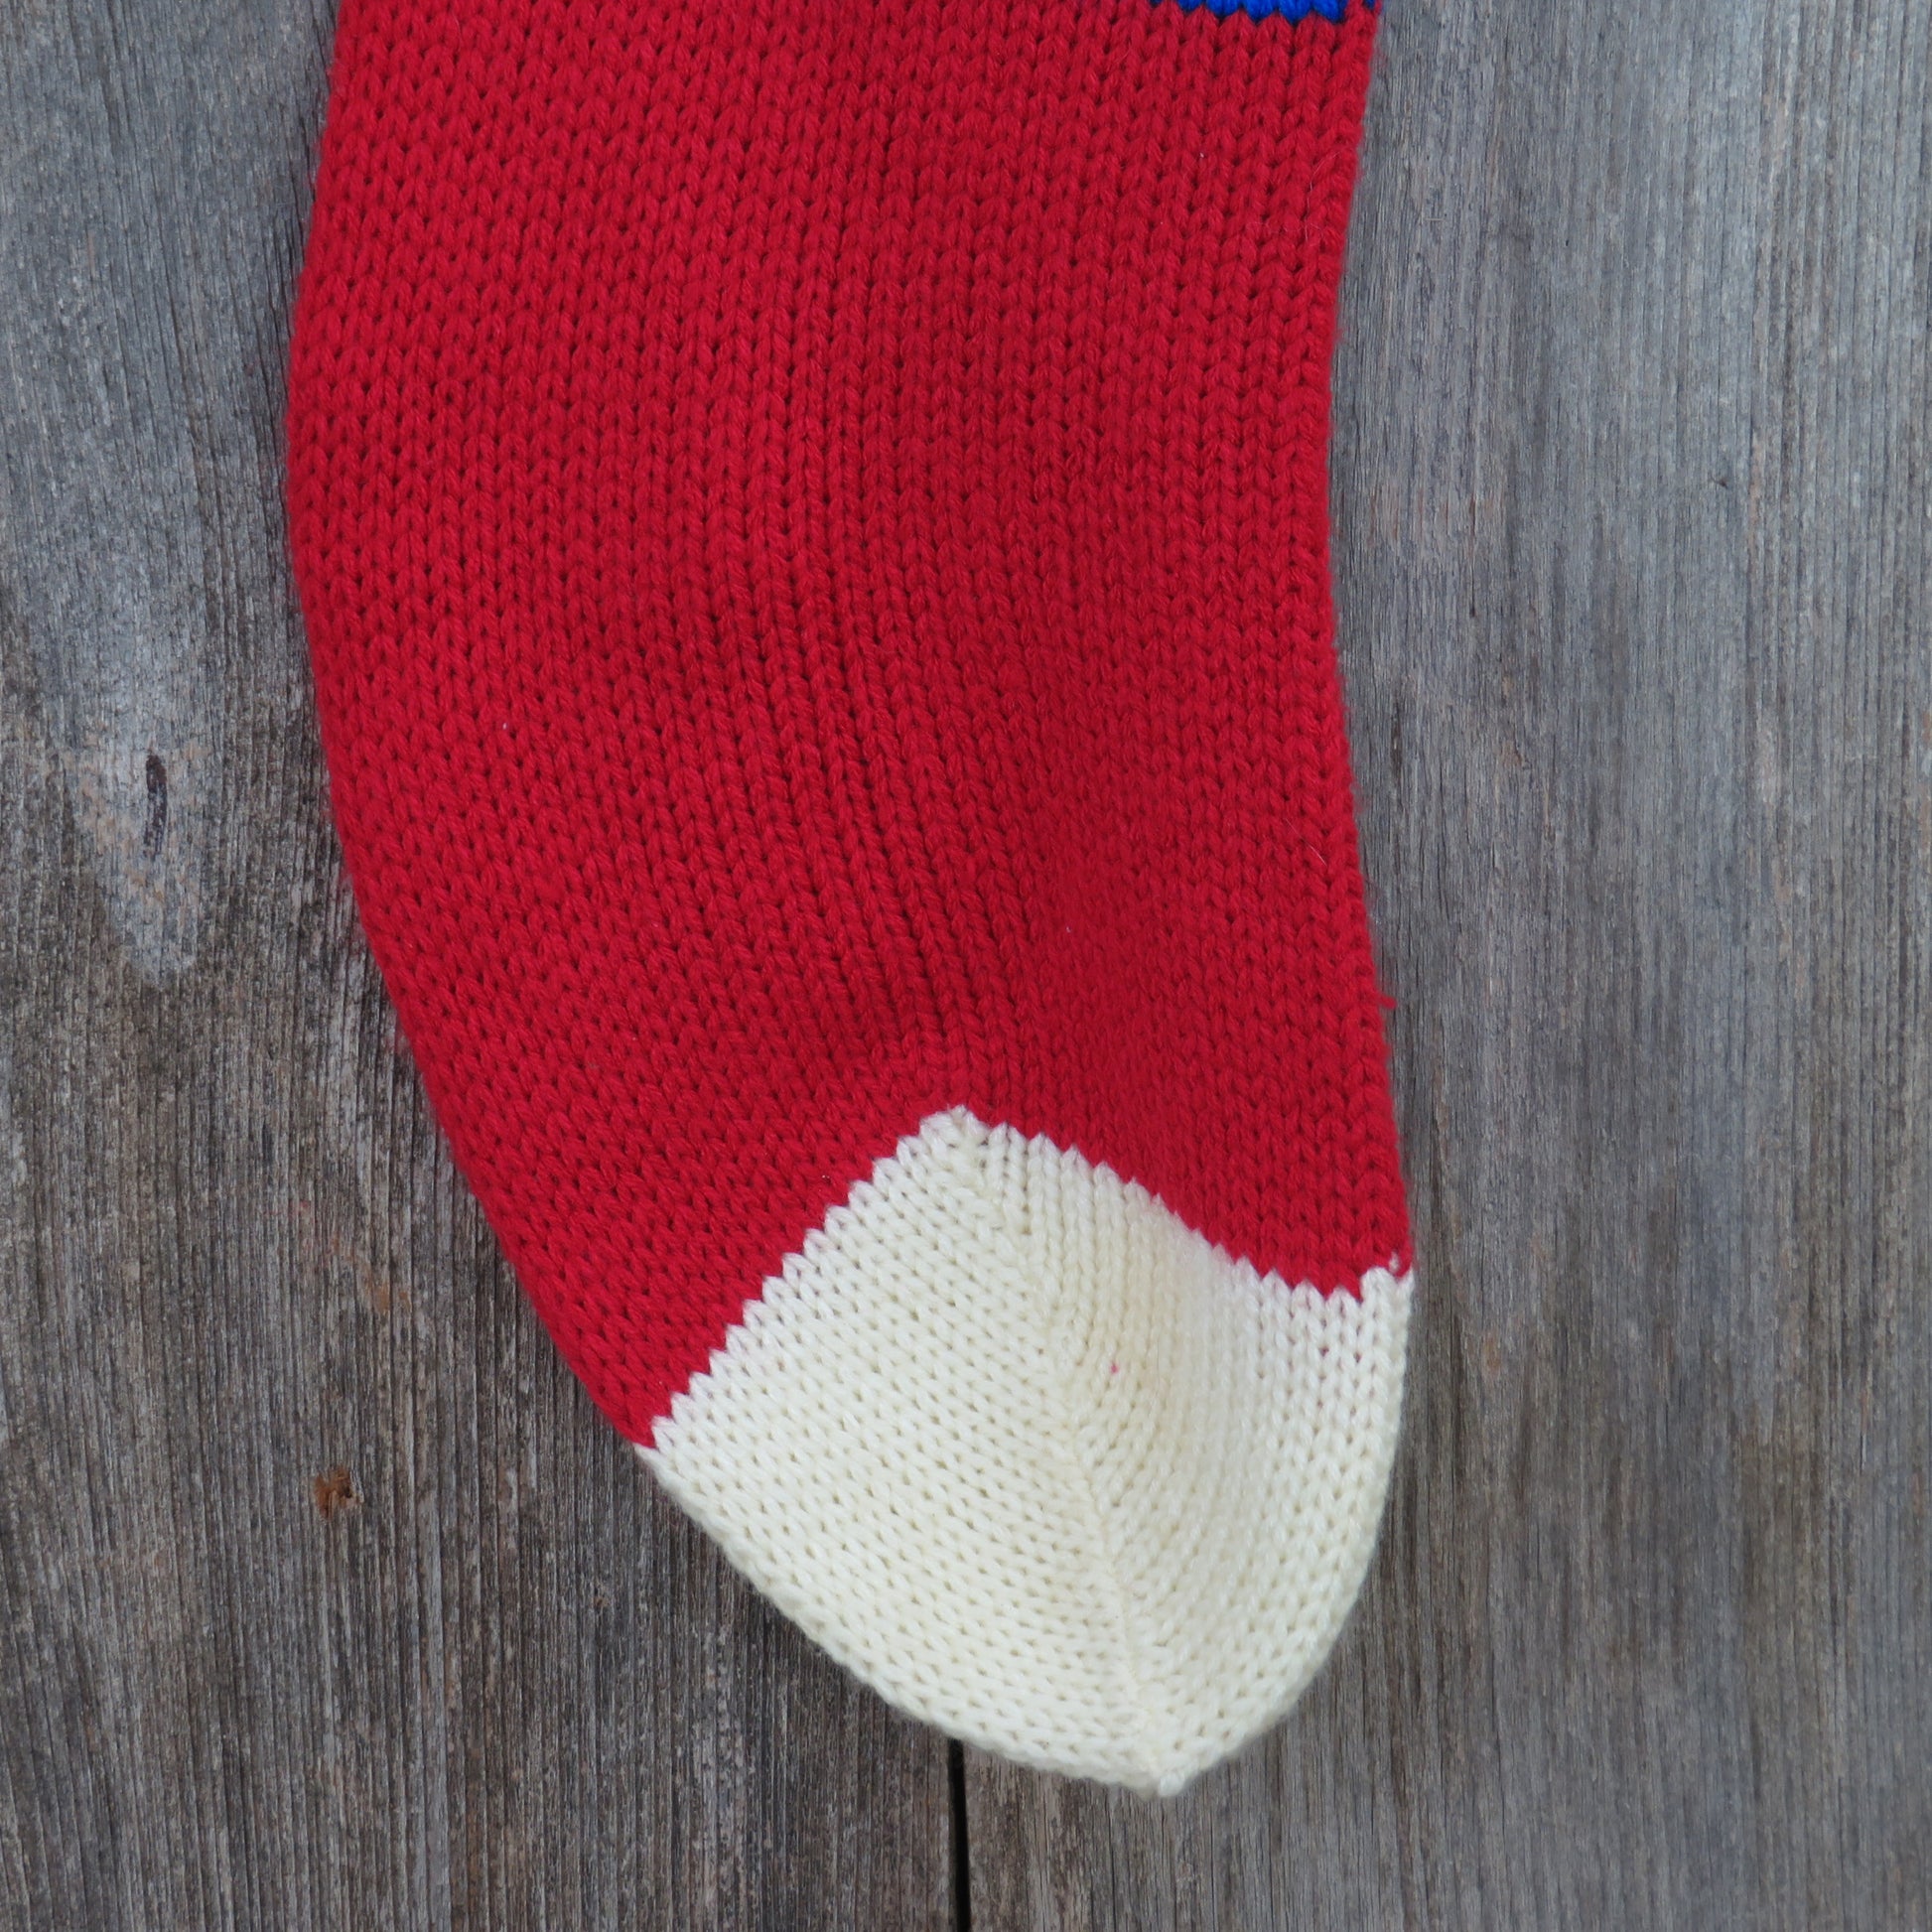 Vintage Knit Christmas Stocking Applique Snowman Frosty Blue Red Chunky ST107 - At Grandma's Table